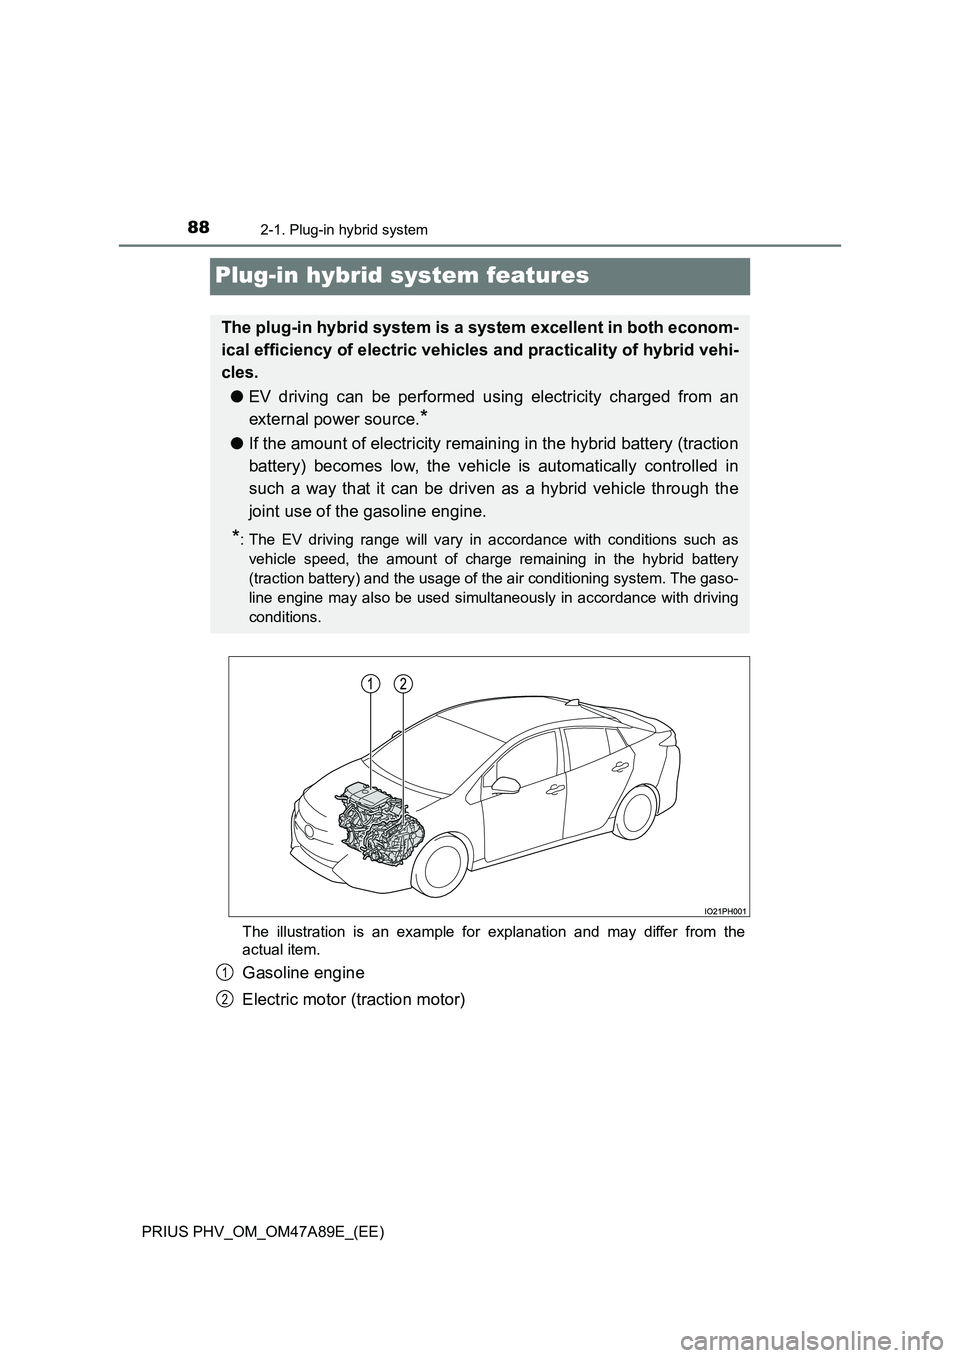 TOYOTA PRIUS PLUG-IN HYBRID 2016  Owners Manual 882-1. Plug-in hybrid system
PRIUS PHV_OM_OM47A89E_(EE)
Plug-in hybrid system features
The illustration is an example for explanation and may differ from the 
actual item.
Gasoline engine 
Electric mo